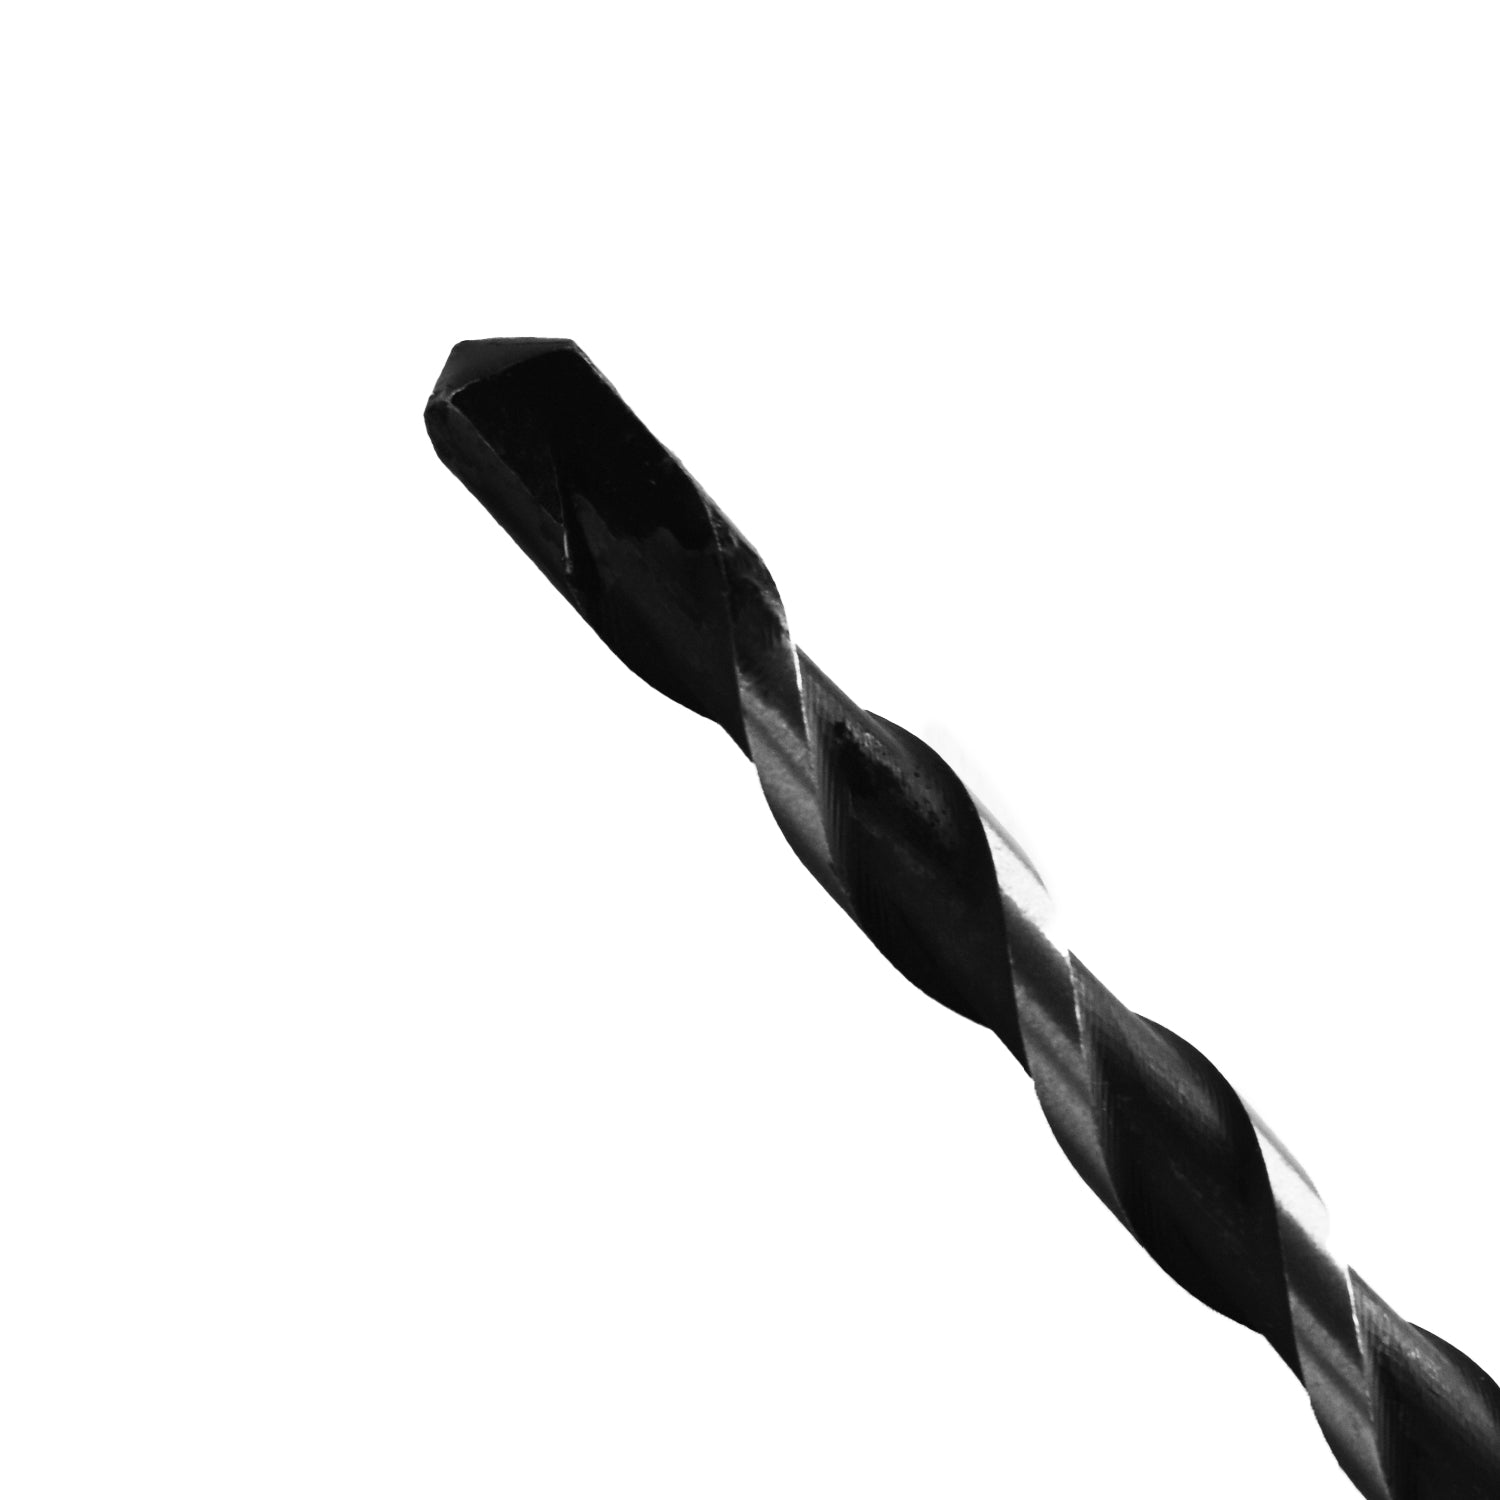 Masonry Carbide Tip Drill Bit (2 Sizes Available) - Suitable for Framola Post Bases